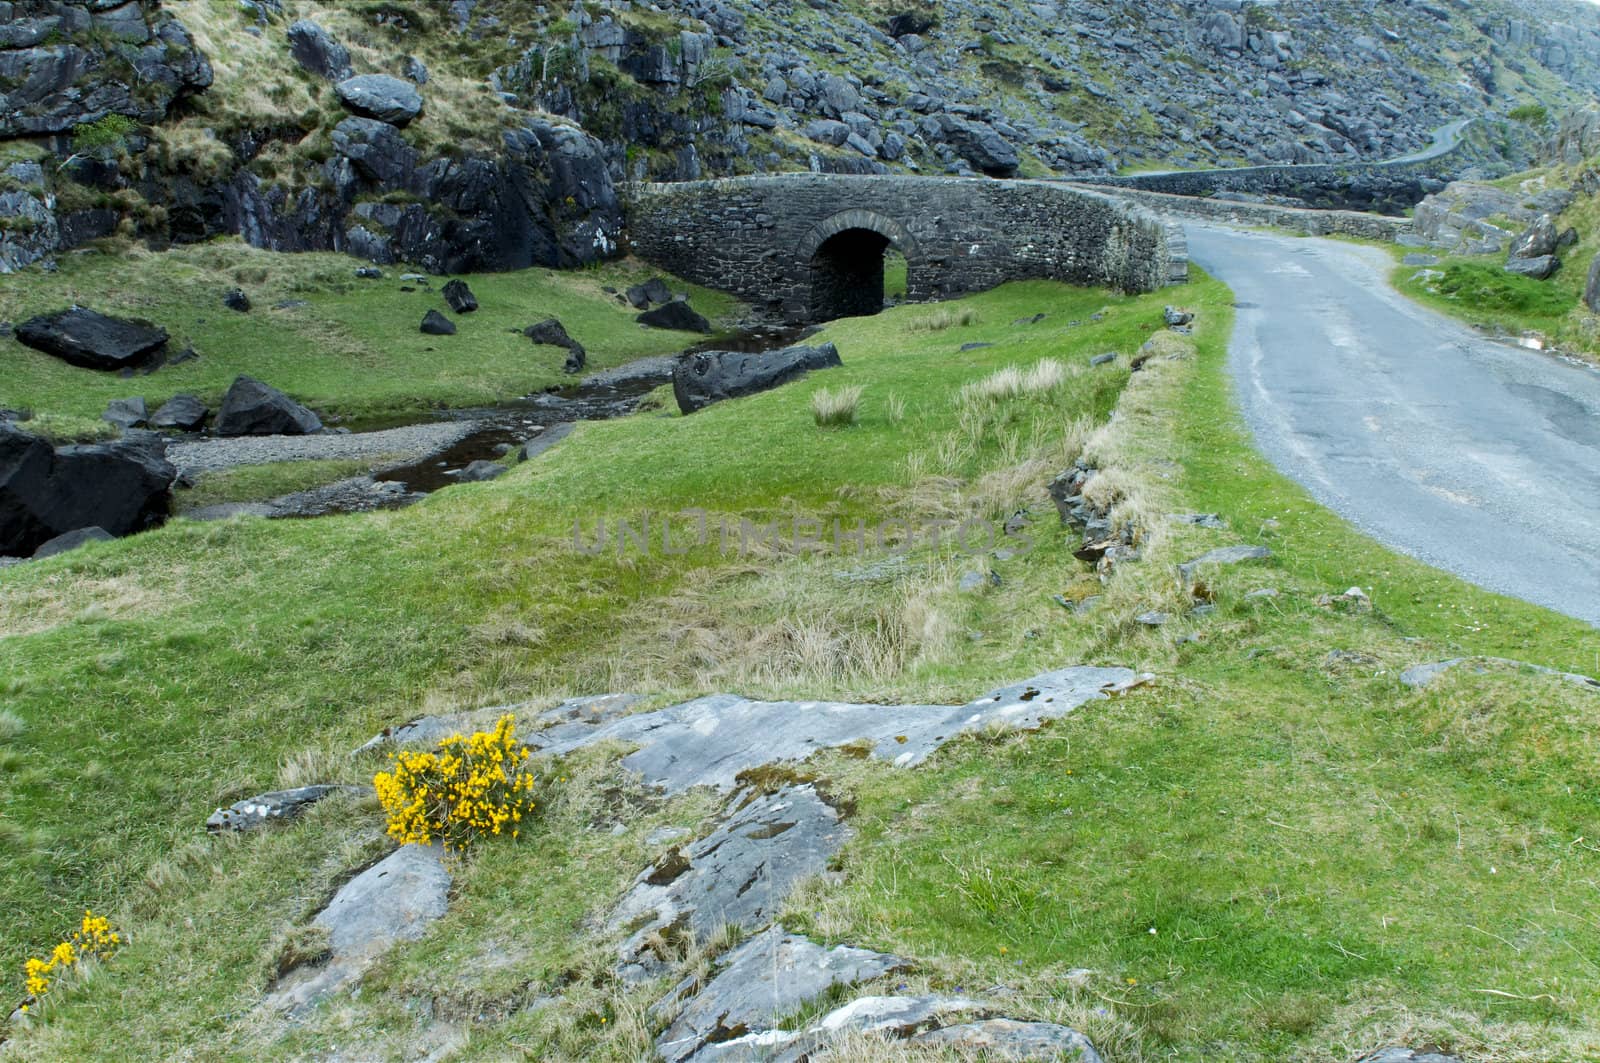 Road in the valley on the narrow part of Gap of Dunloe, Ireland